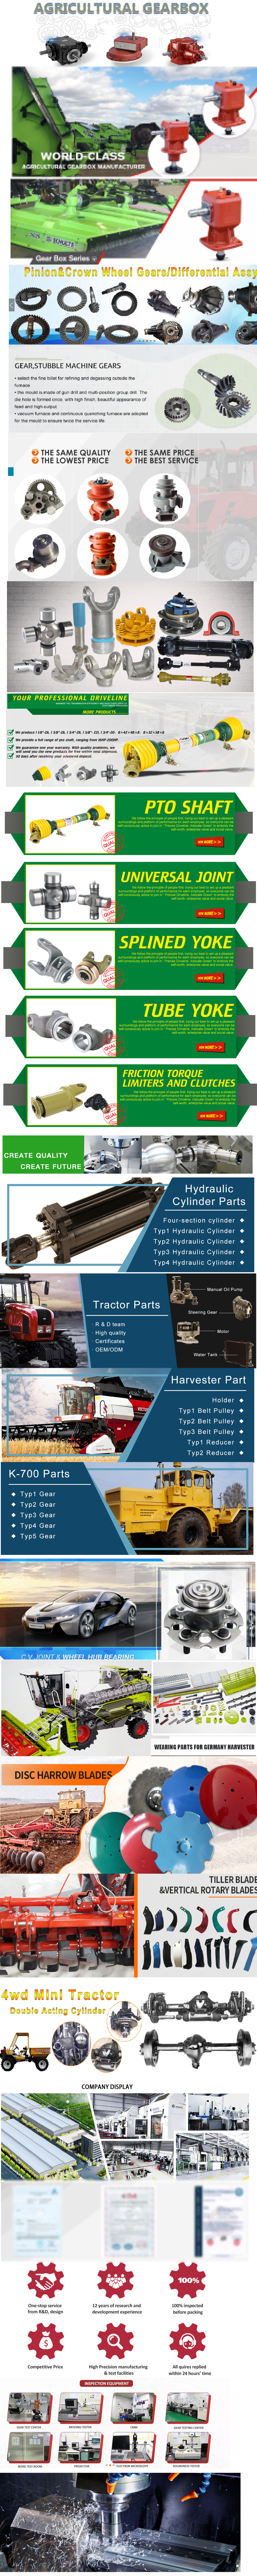 Africa  made in China - replacement parts -   john deere 709 gearbox   Vladivostok Russian Federation   Hot Sale Dq804 80HP 4WD Durable Big Chassis Agricultural Farm Tractor with Sunshade  by Tractor Factory Exporting with ce certificate top quality low price